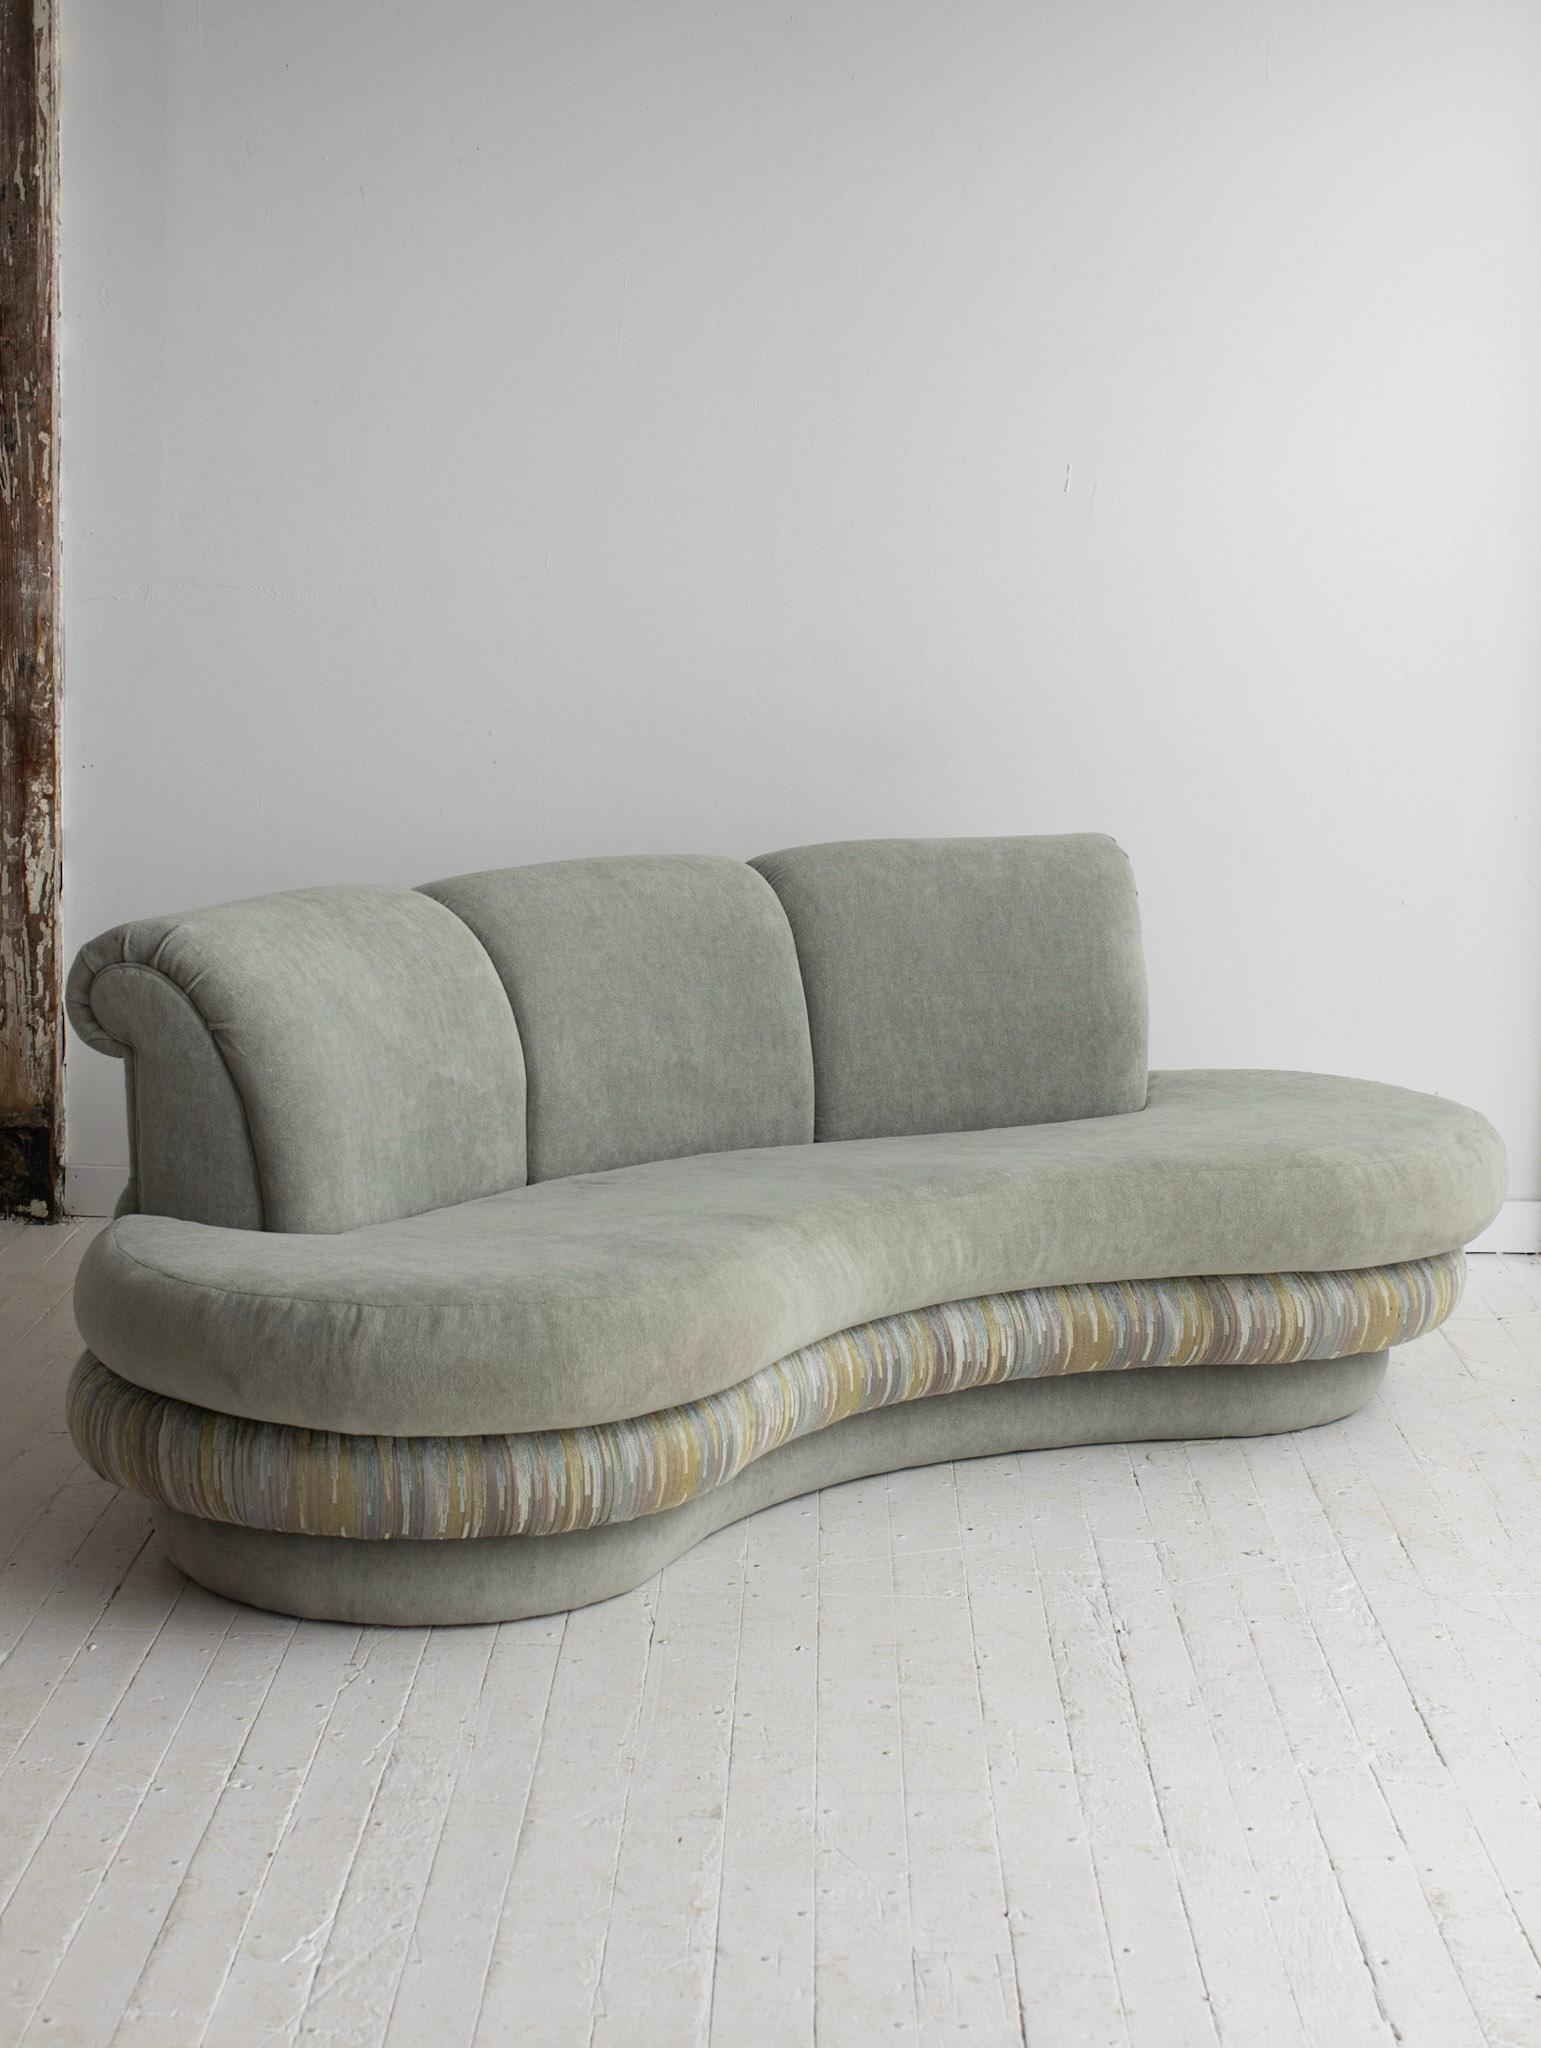 Adrian Pearsall cloud sofa for Comfort Designs. Stacked kidney shape. Original high pile upholstery.